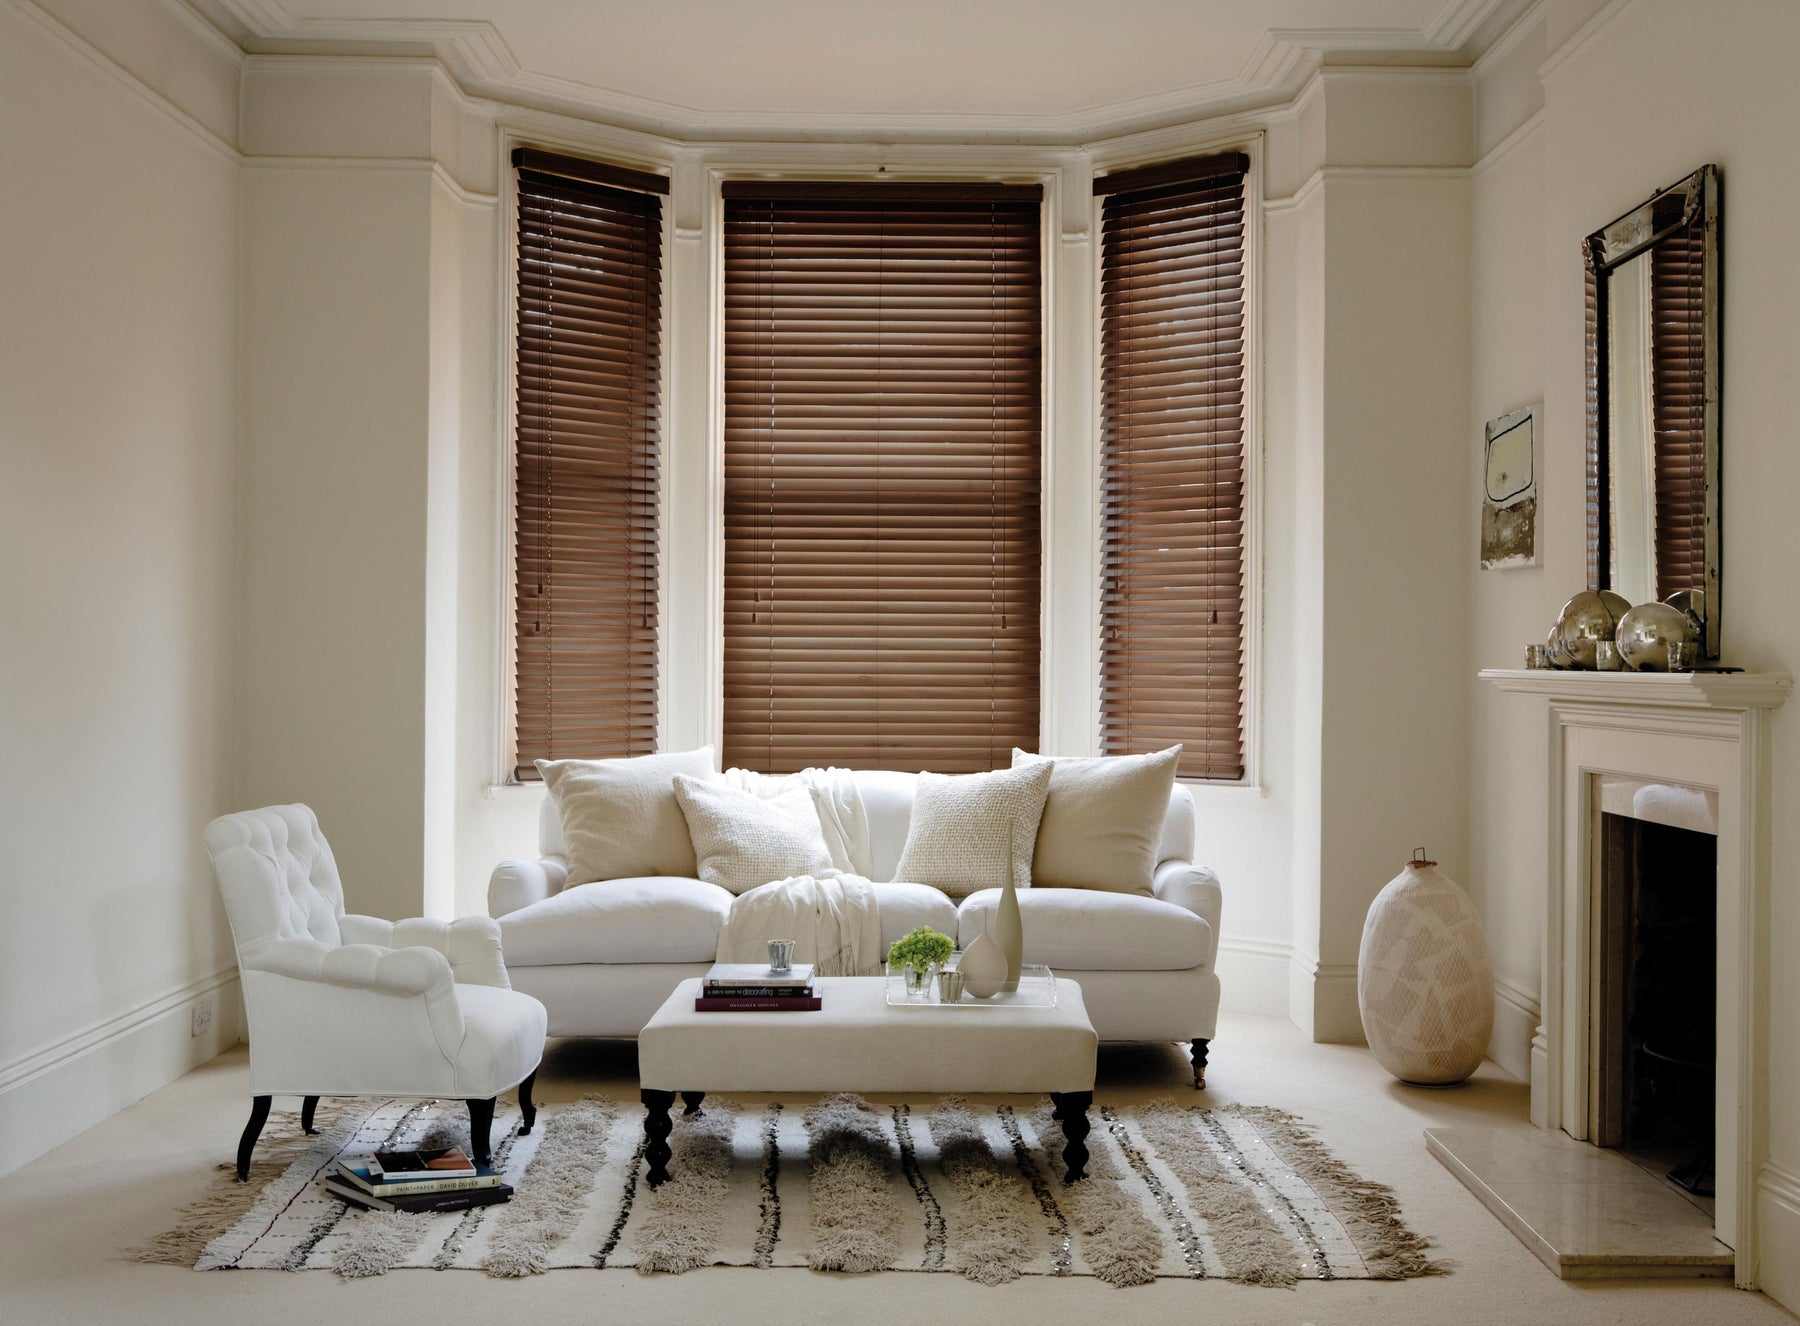 Do Blinds Increase Privacy When Turned Up or Down?